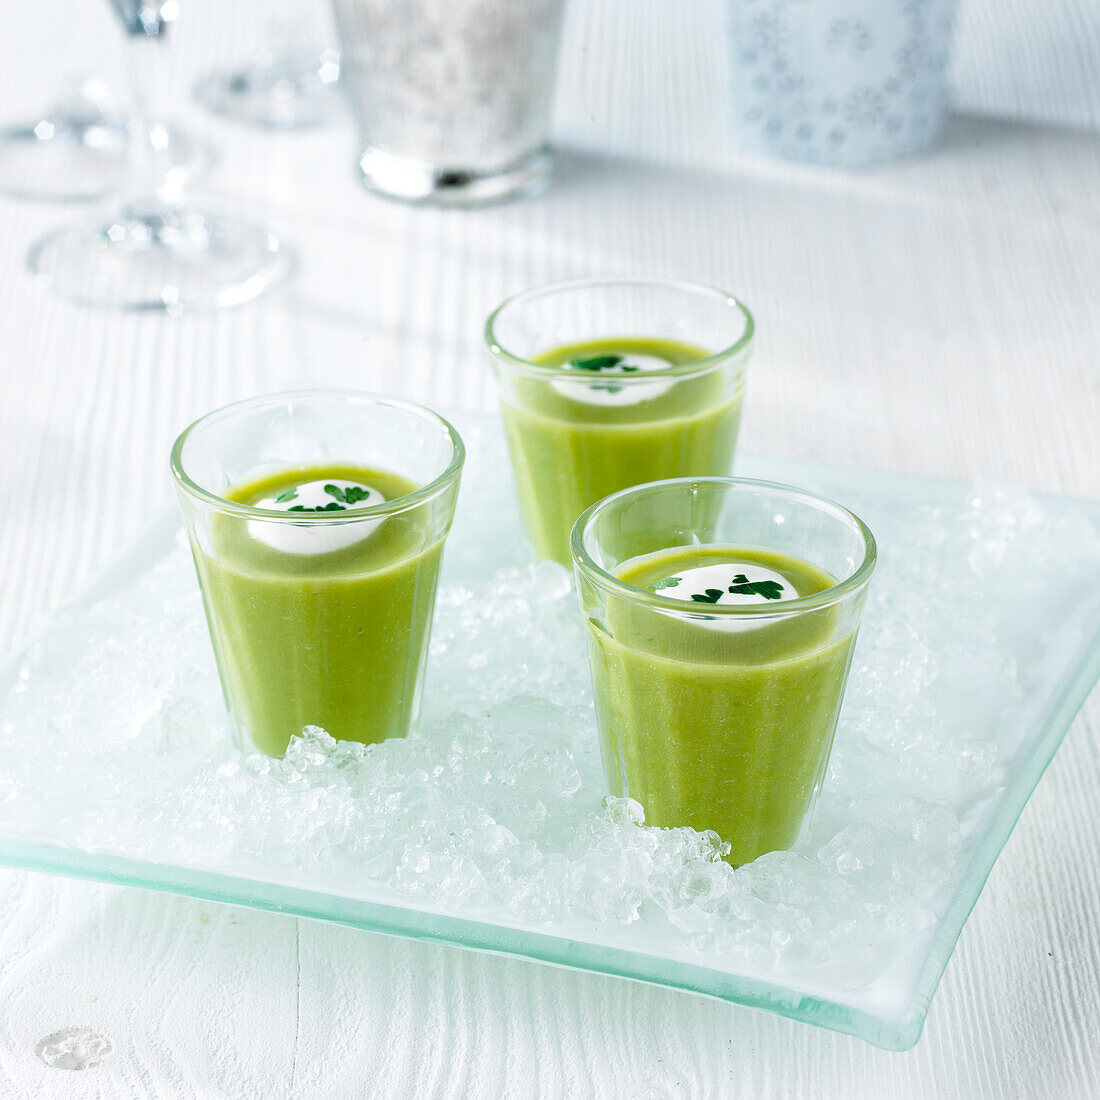 Glasses of chilled pea soup on tray of ice